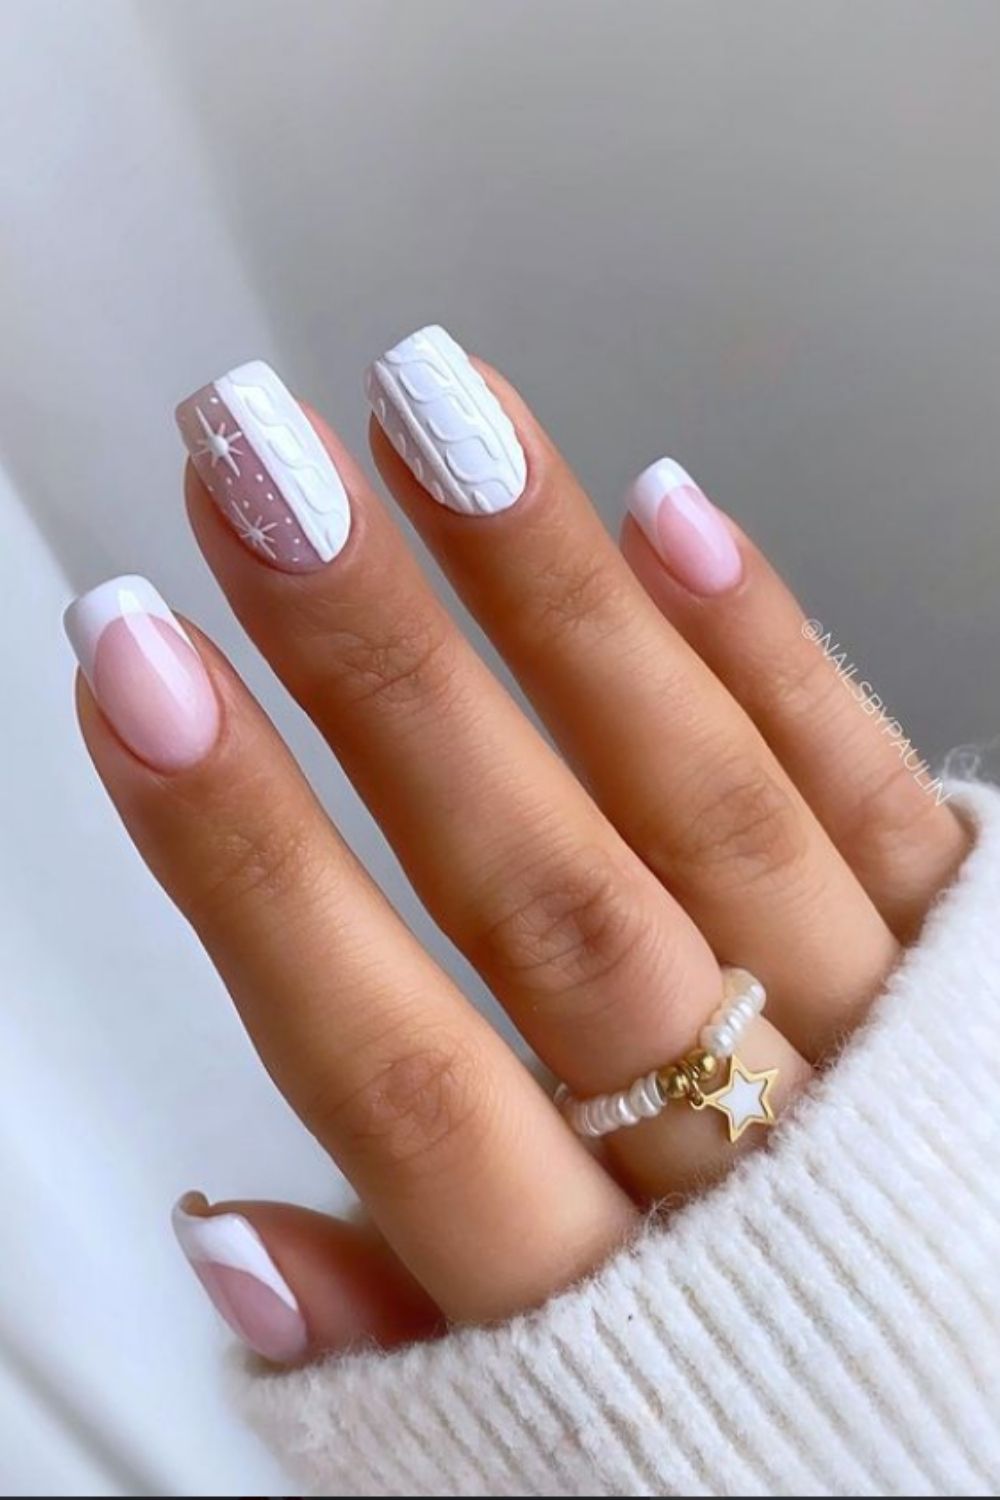 White and pink square nails art